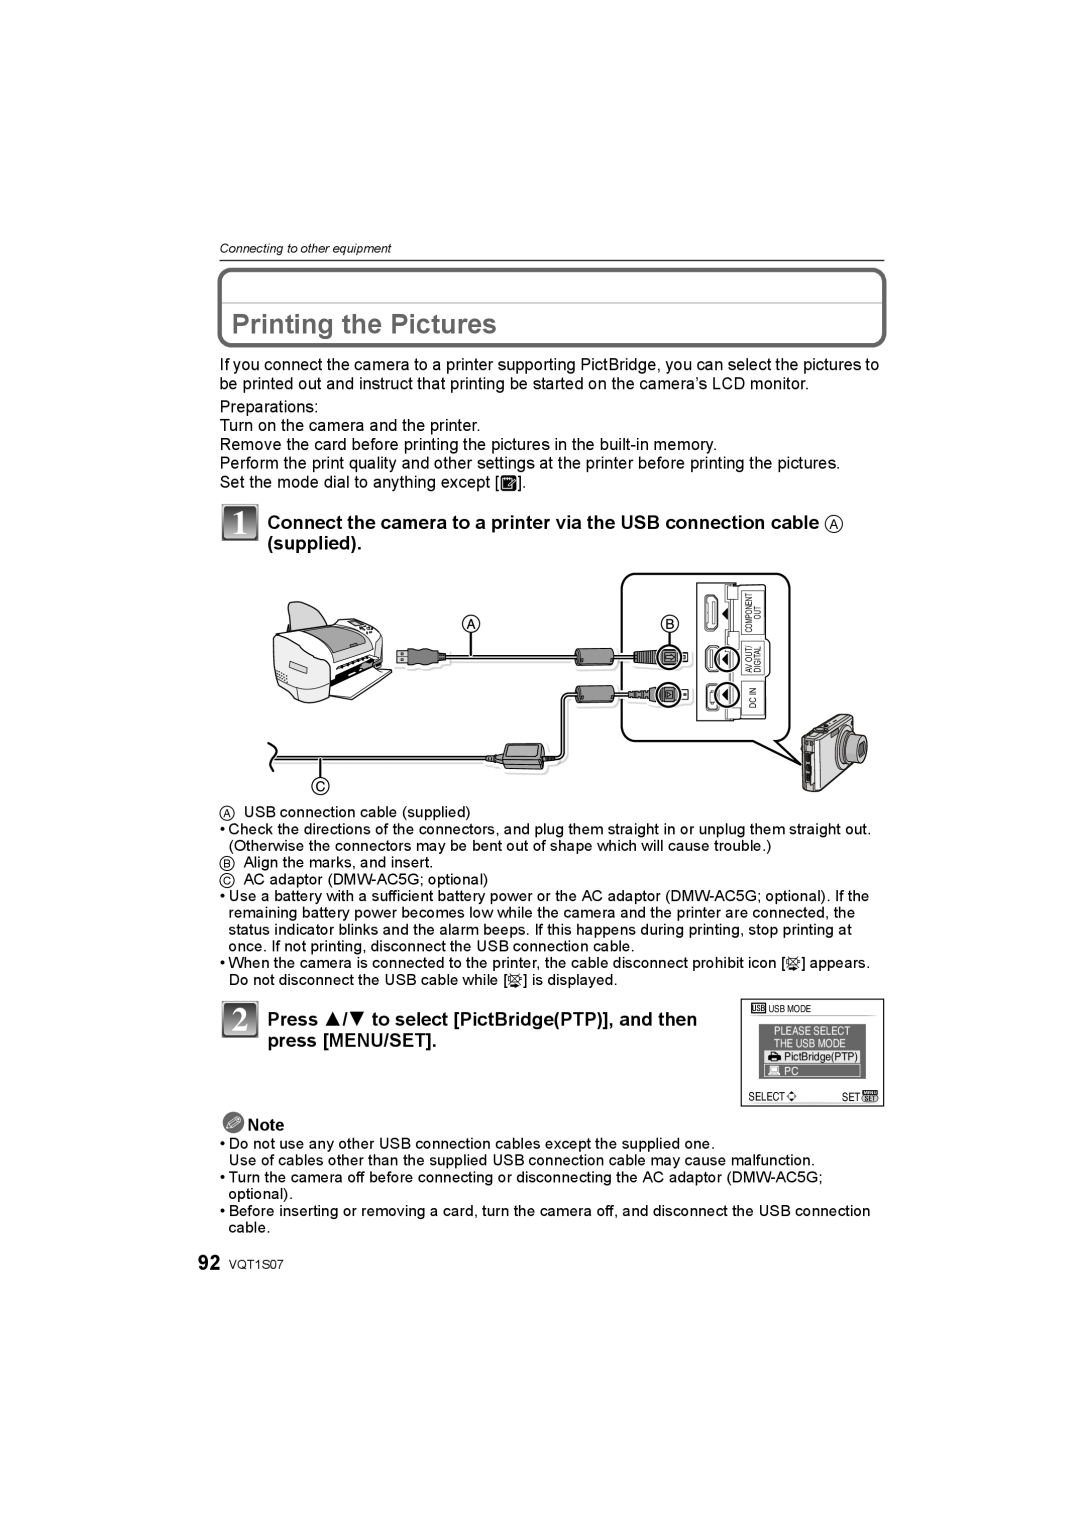 Panasonic DMC-FX38 Printing the Pictures, Connect the camera to a printer via the USB connection cable A, supplied 